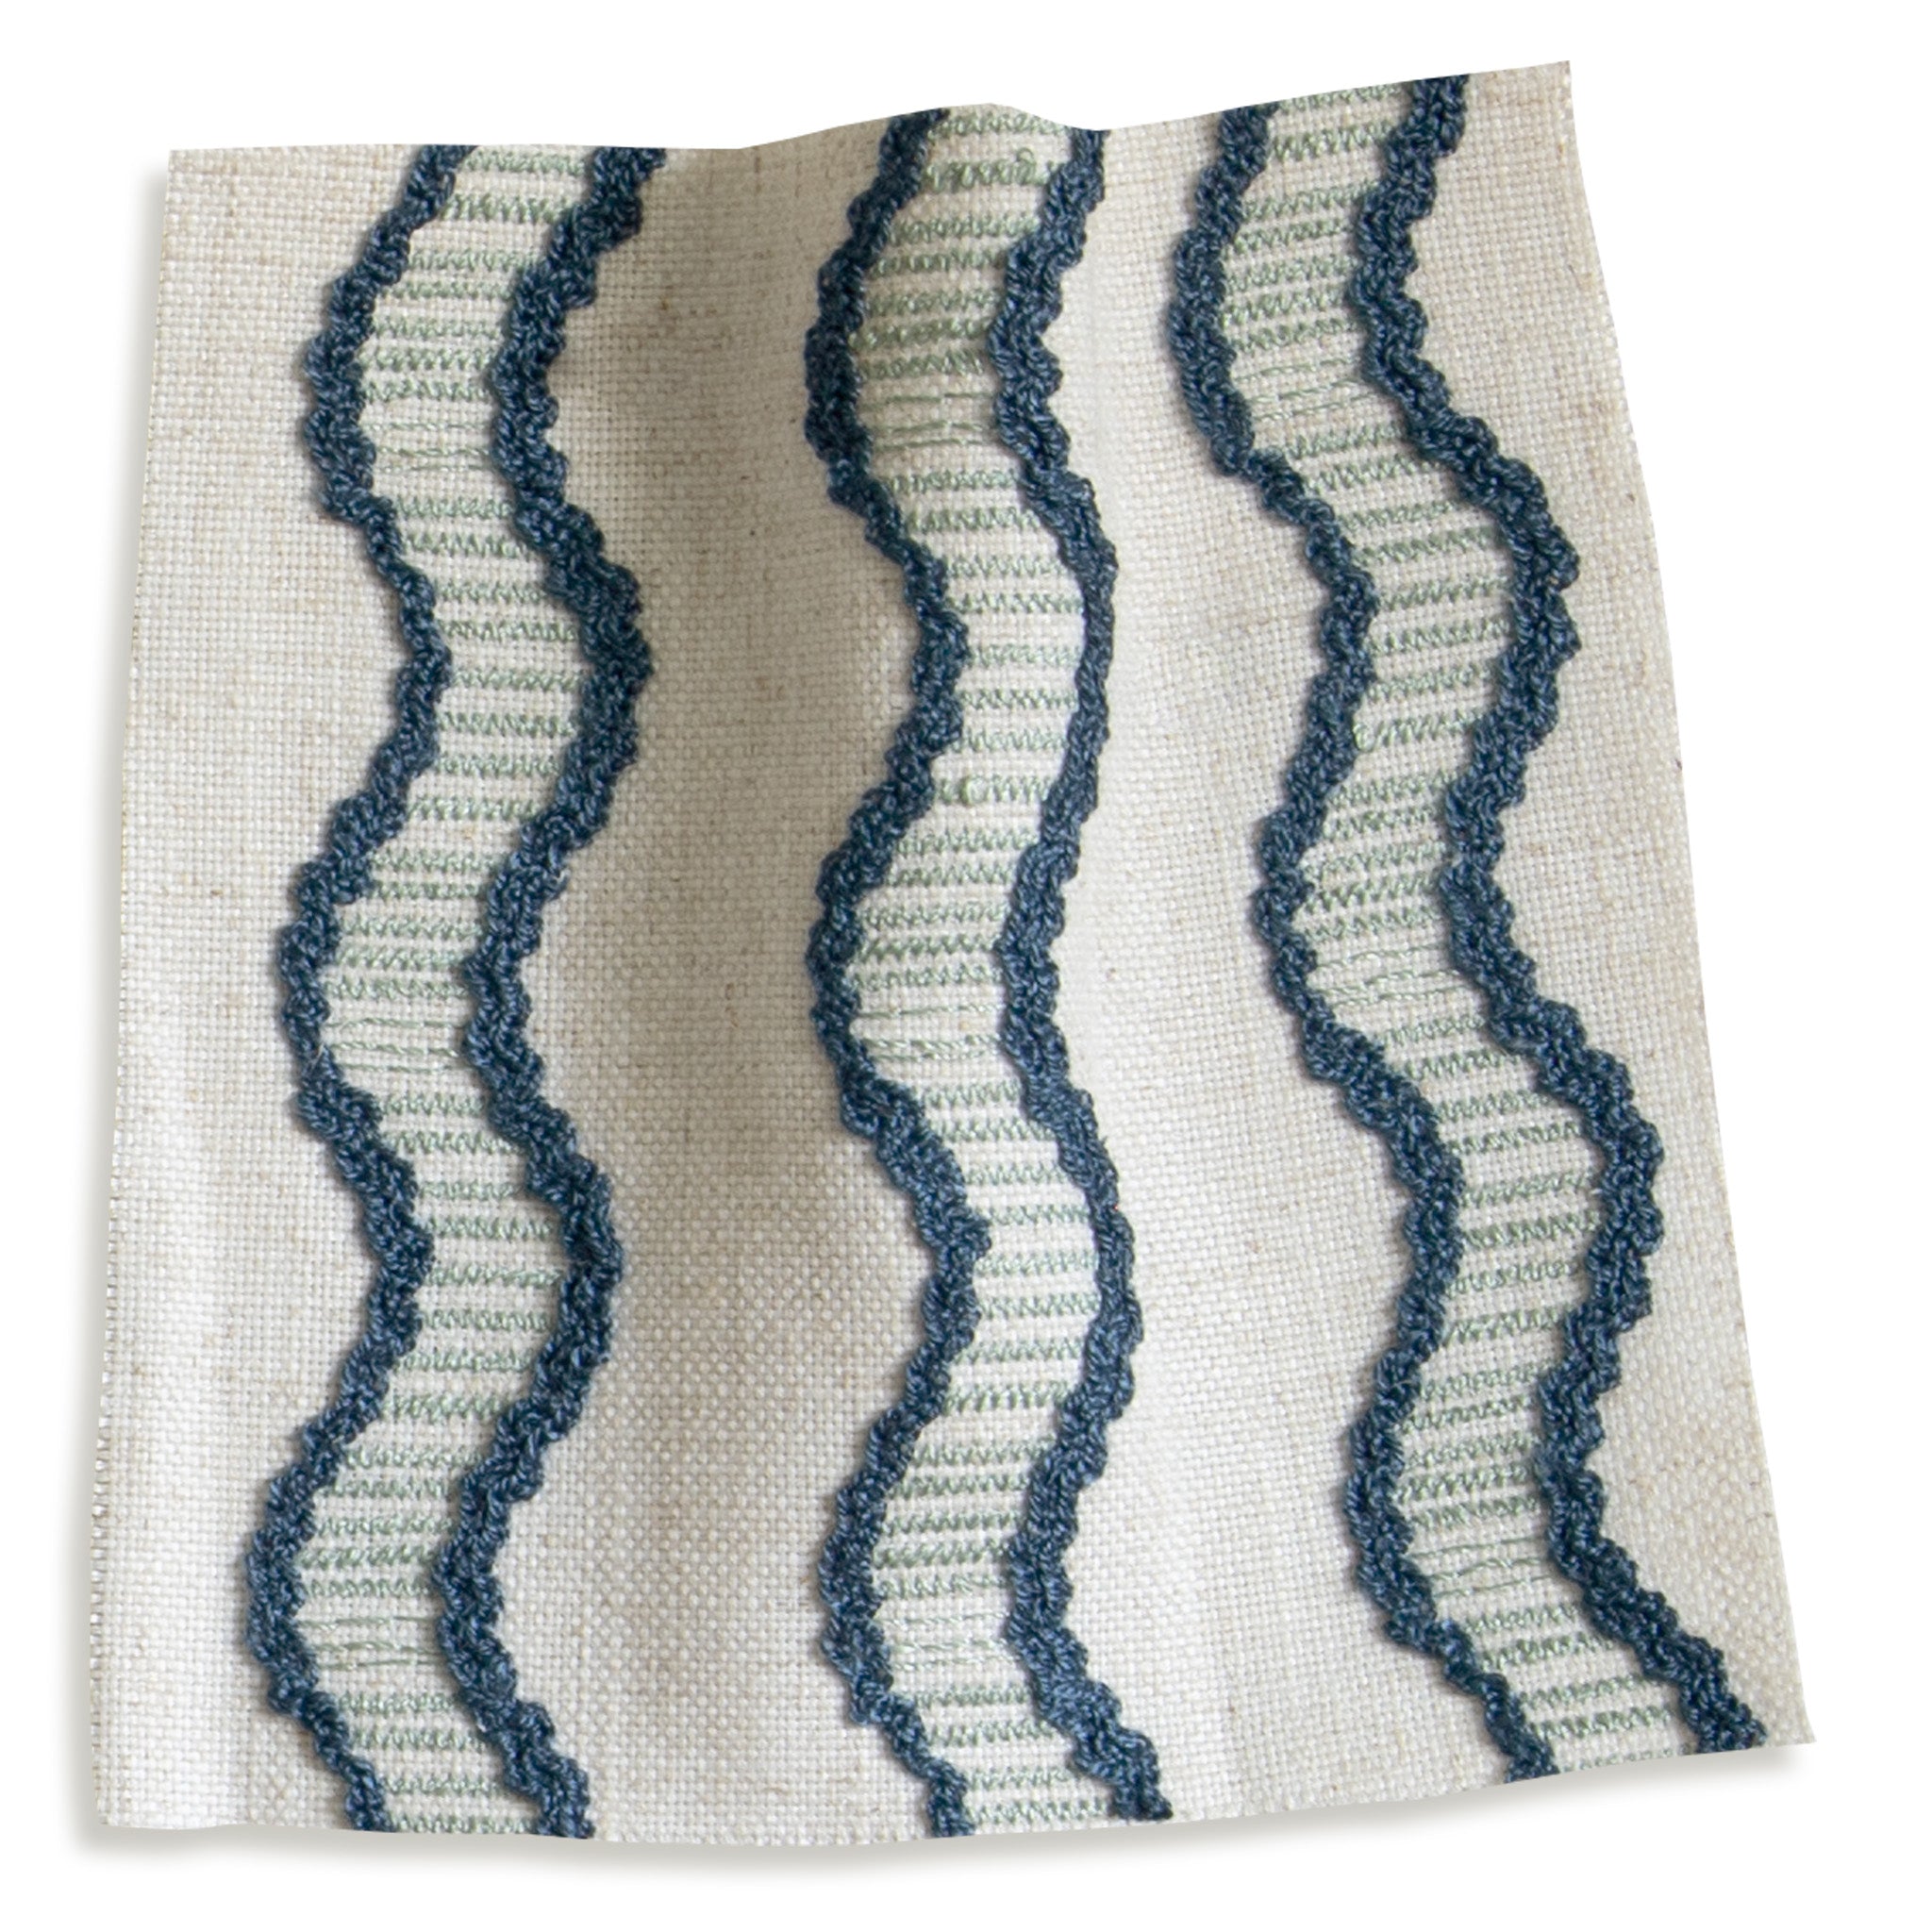 embroidered cream fabric with wavy blue lines swatch